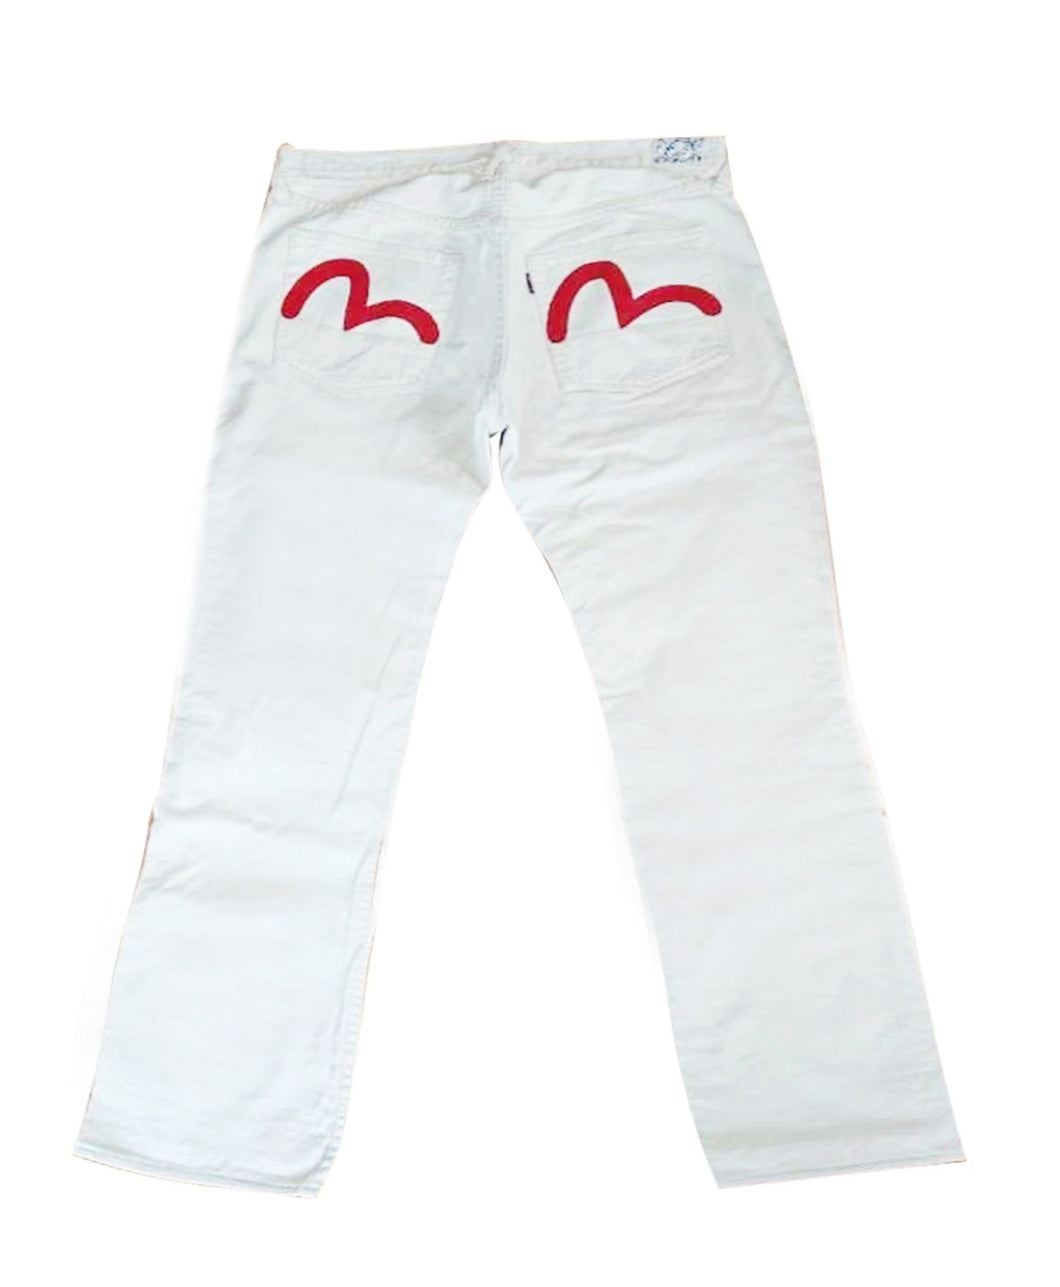 Evisu White and Red Limited Edition Jeans